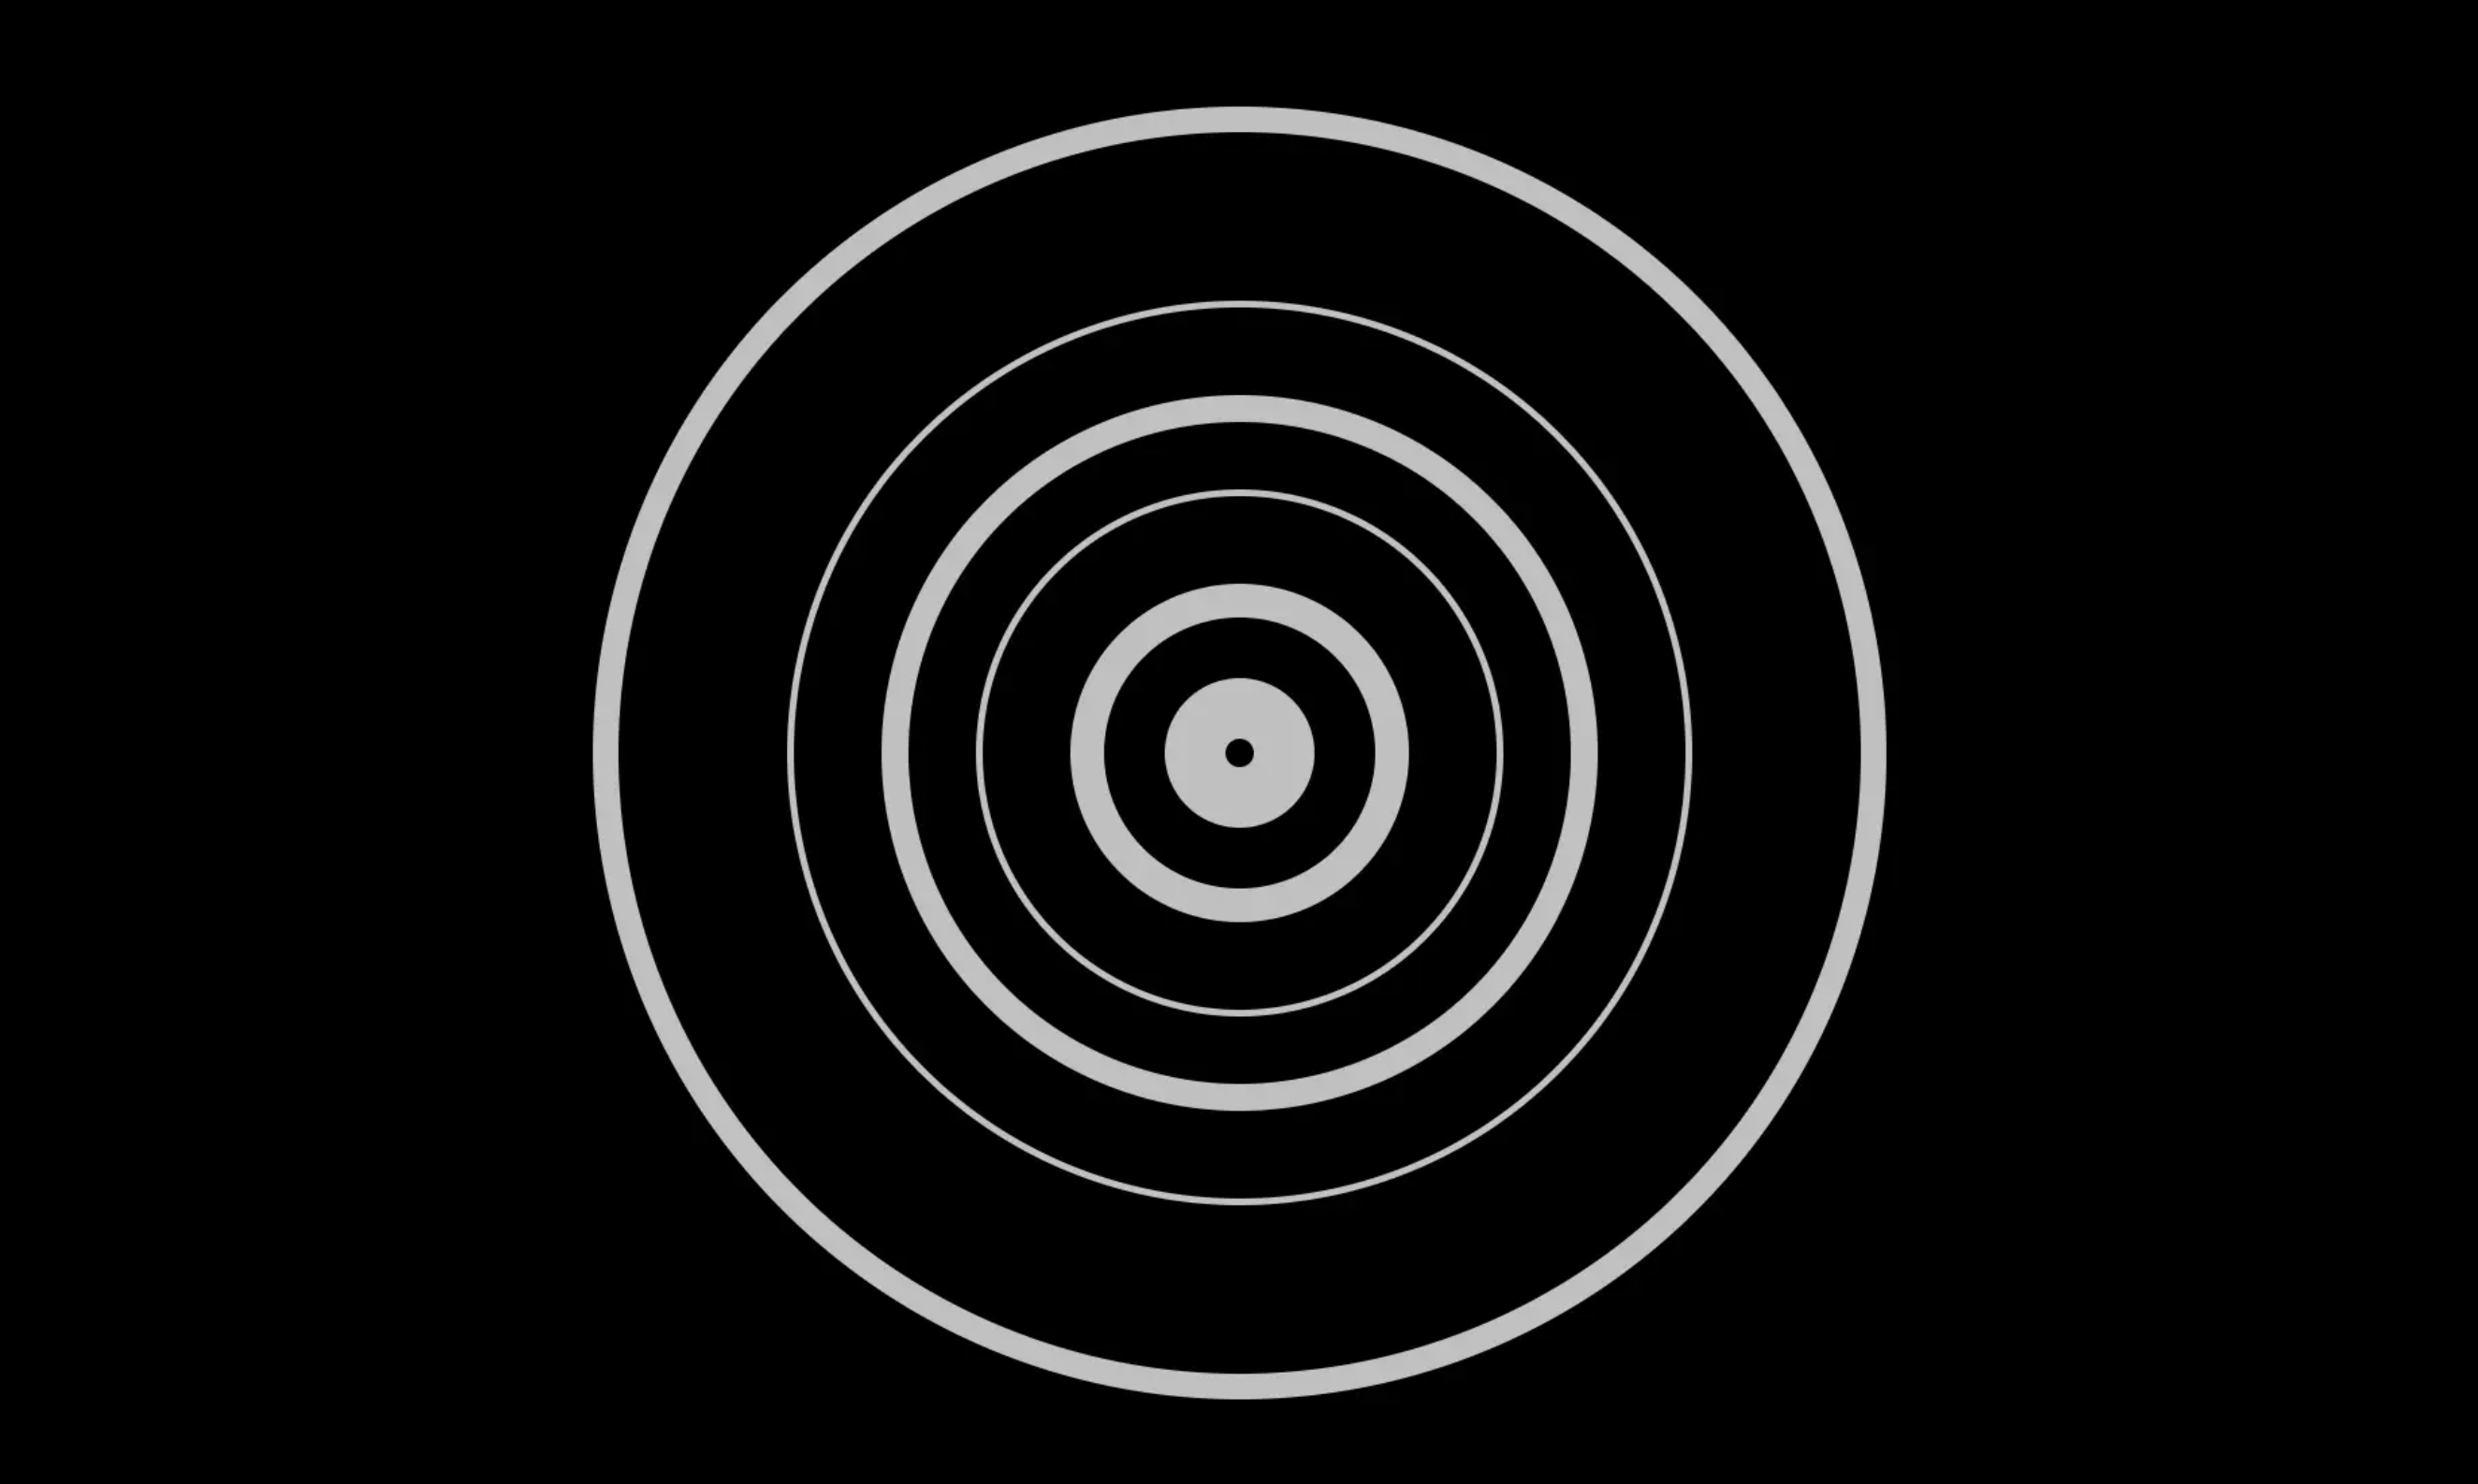 A series of white concentric circles on a black background